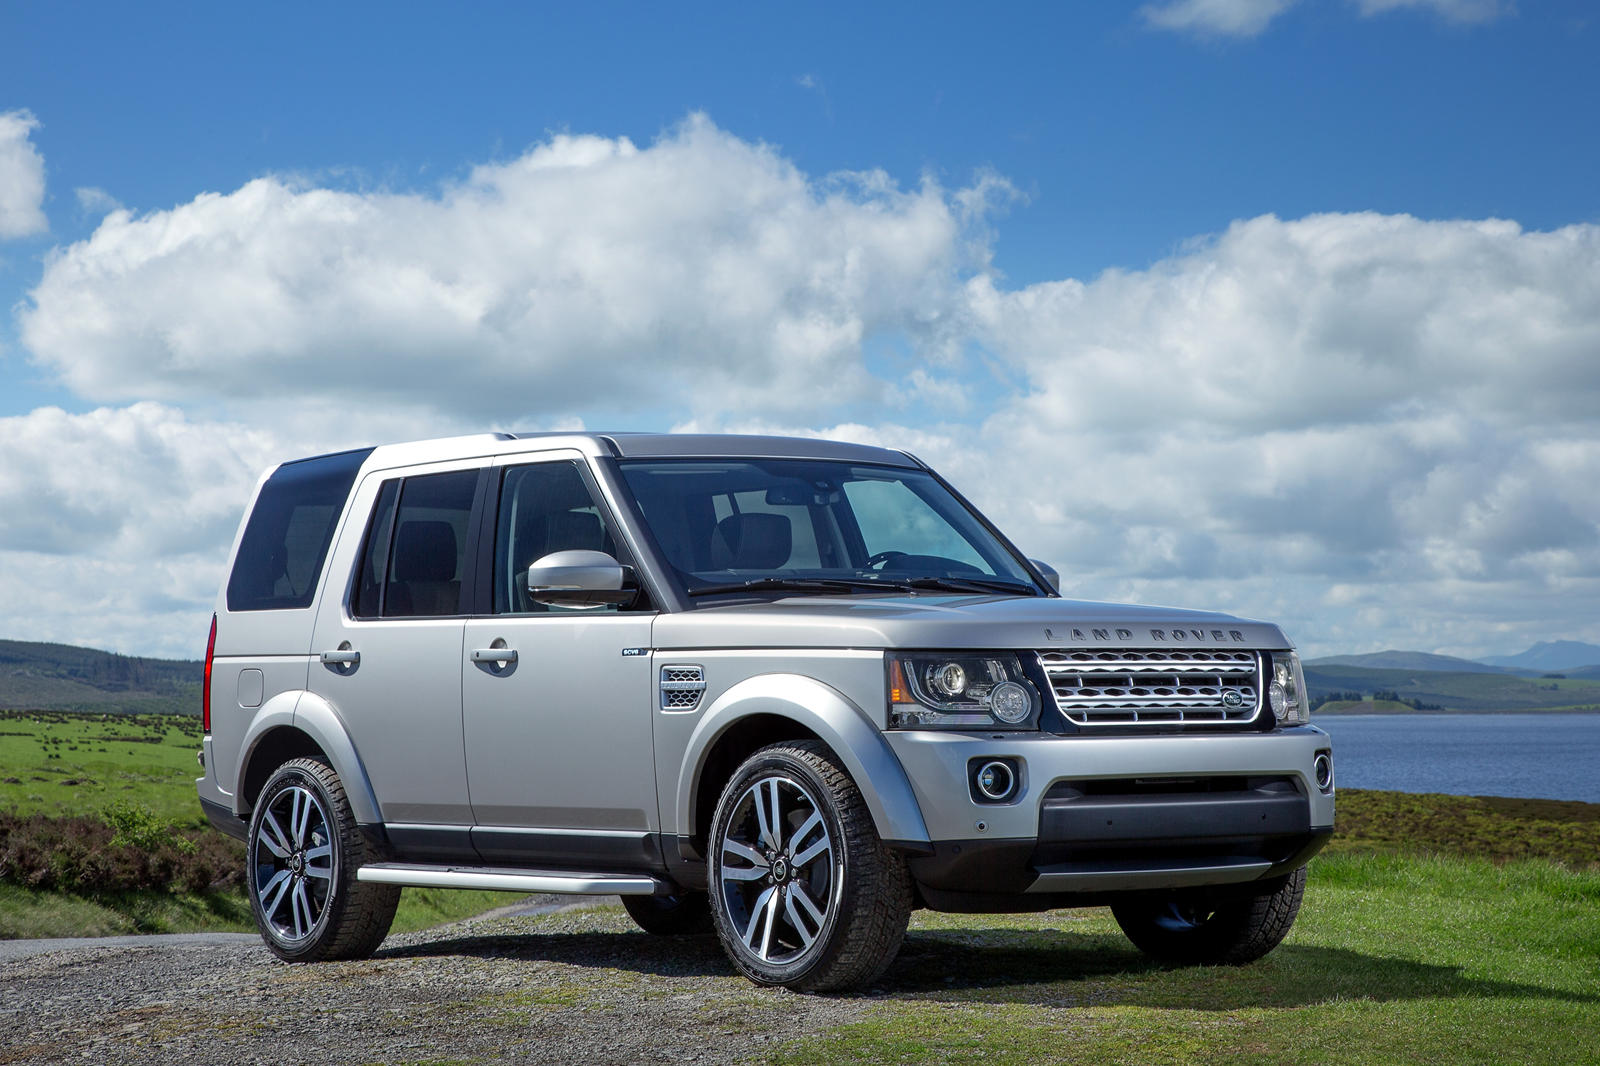 Used Land Rover LR4 For Sale in East Bridgewater, MA CarBuzz